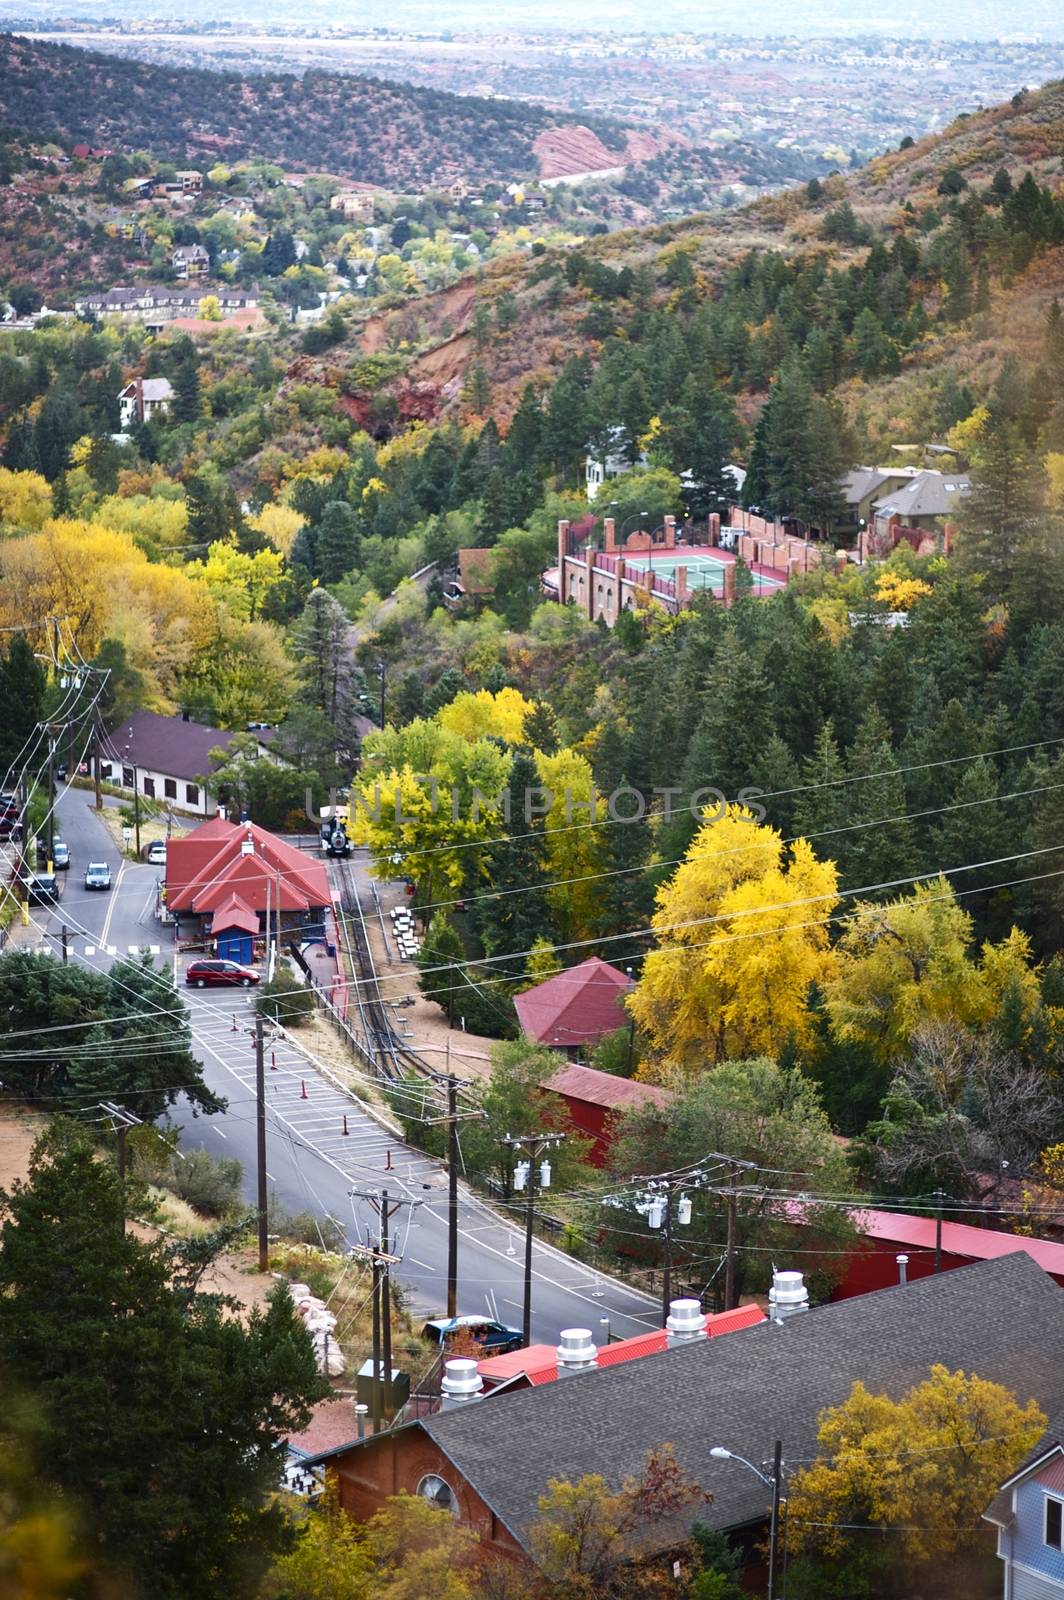 Part of Manitou Springs, Colorado - Bird View. The City of Manitou Springs is a Home Rule Municipality Located in El Paso County, Colorado, United States.